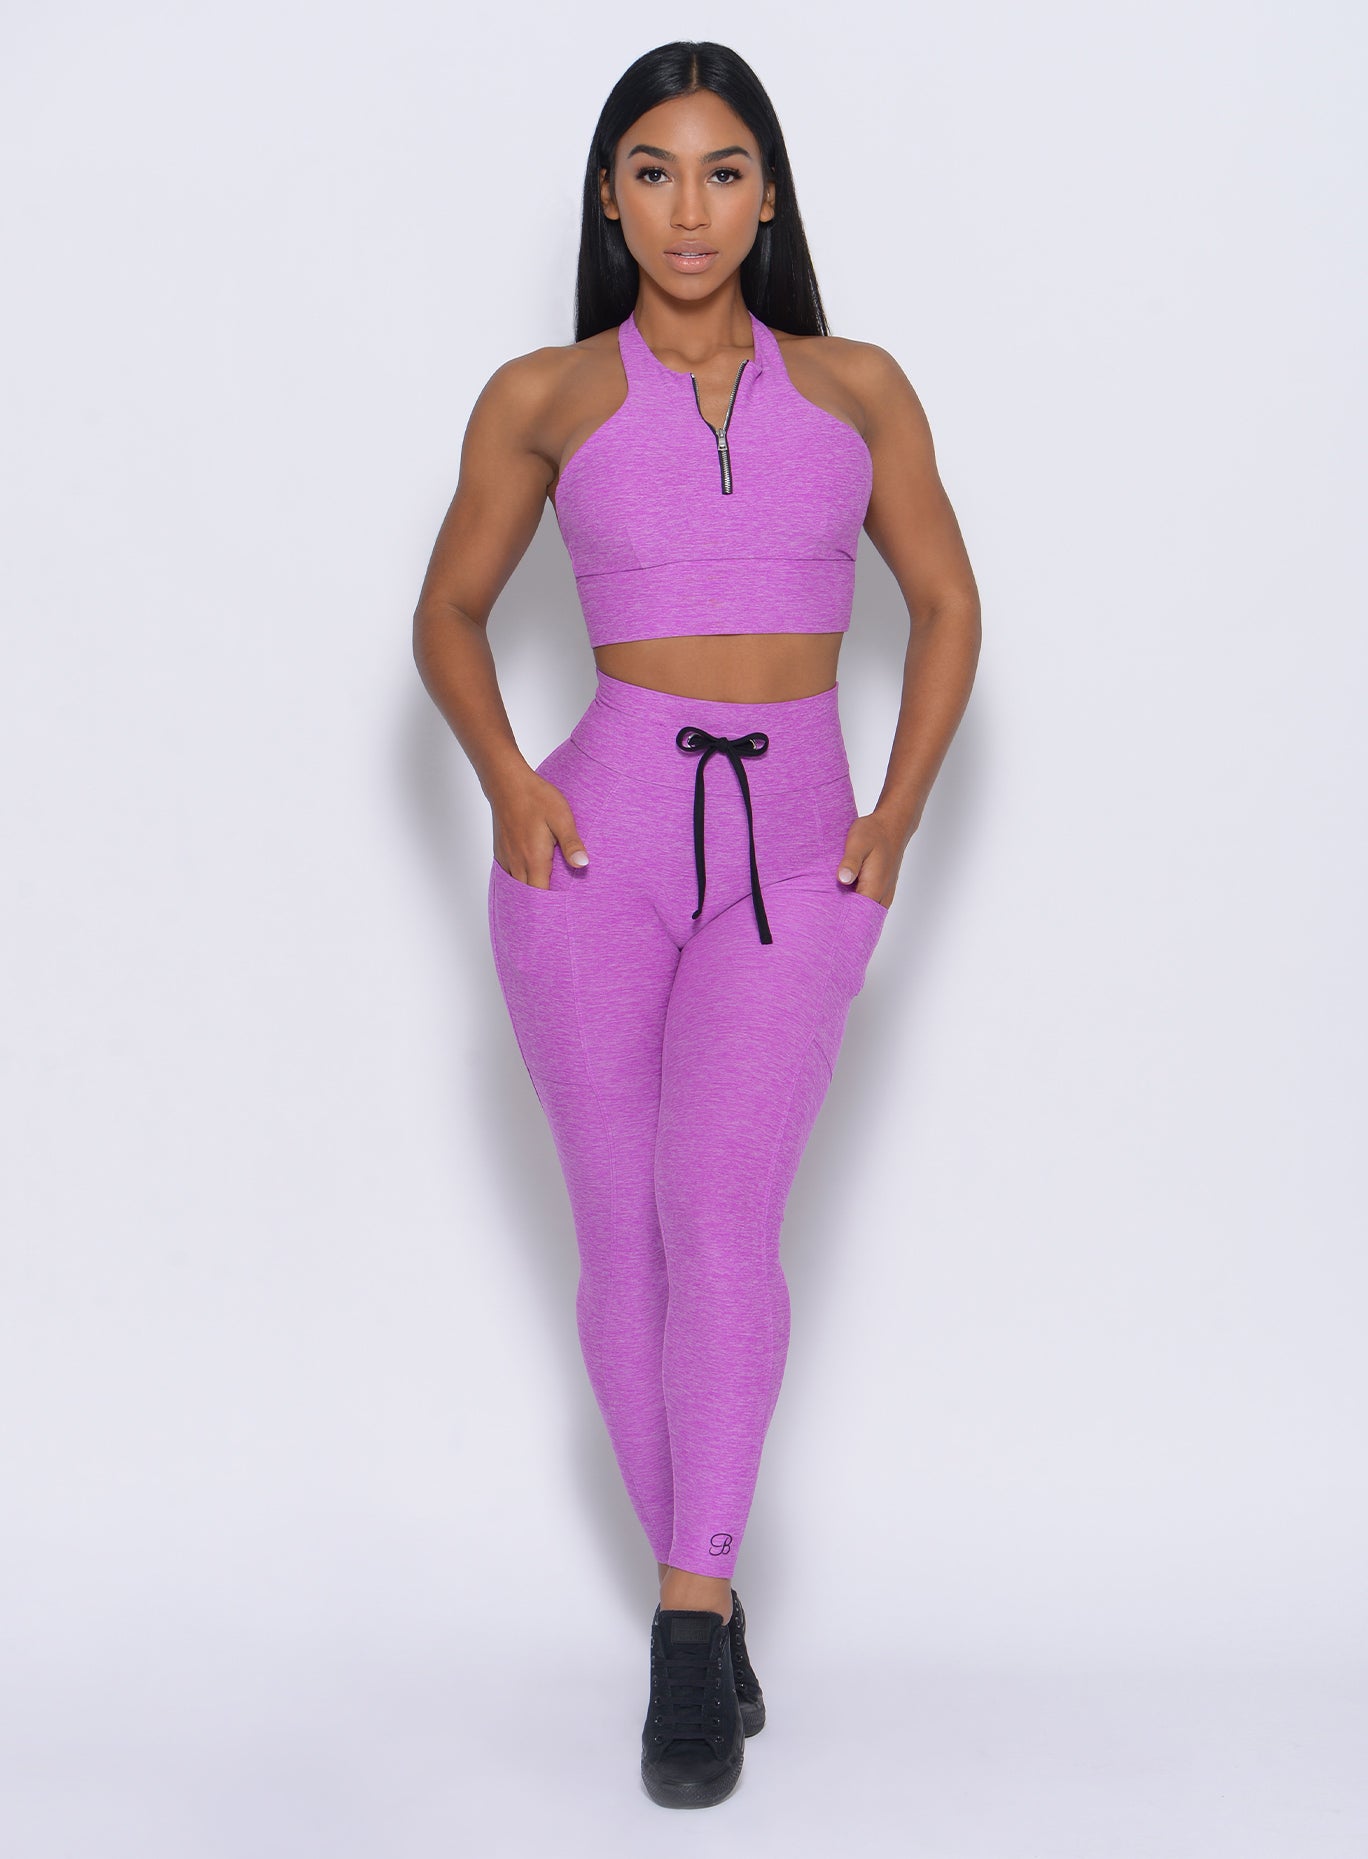 Front profile view of the model wearing our thrive leggings in purple color and a matching bra